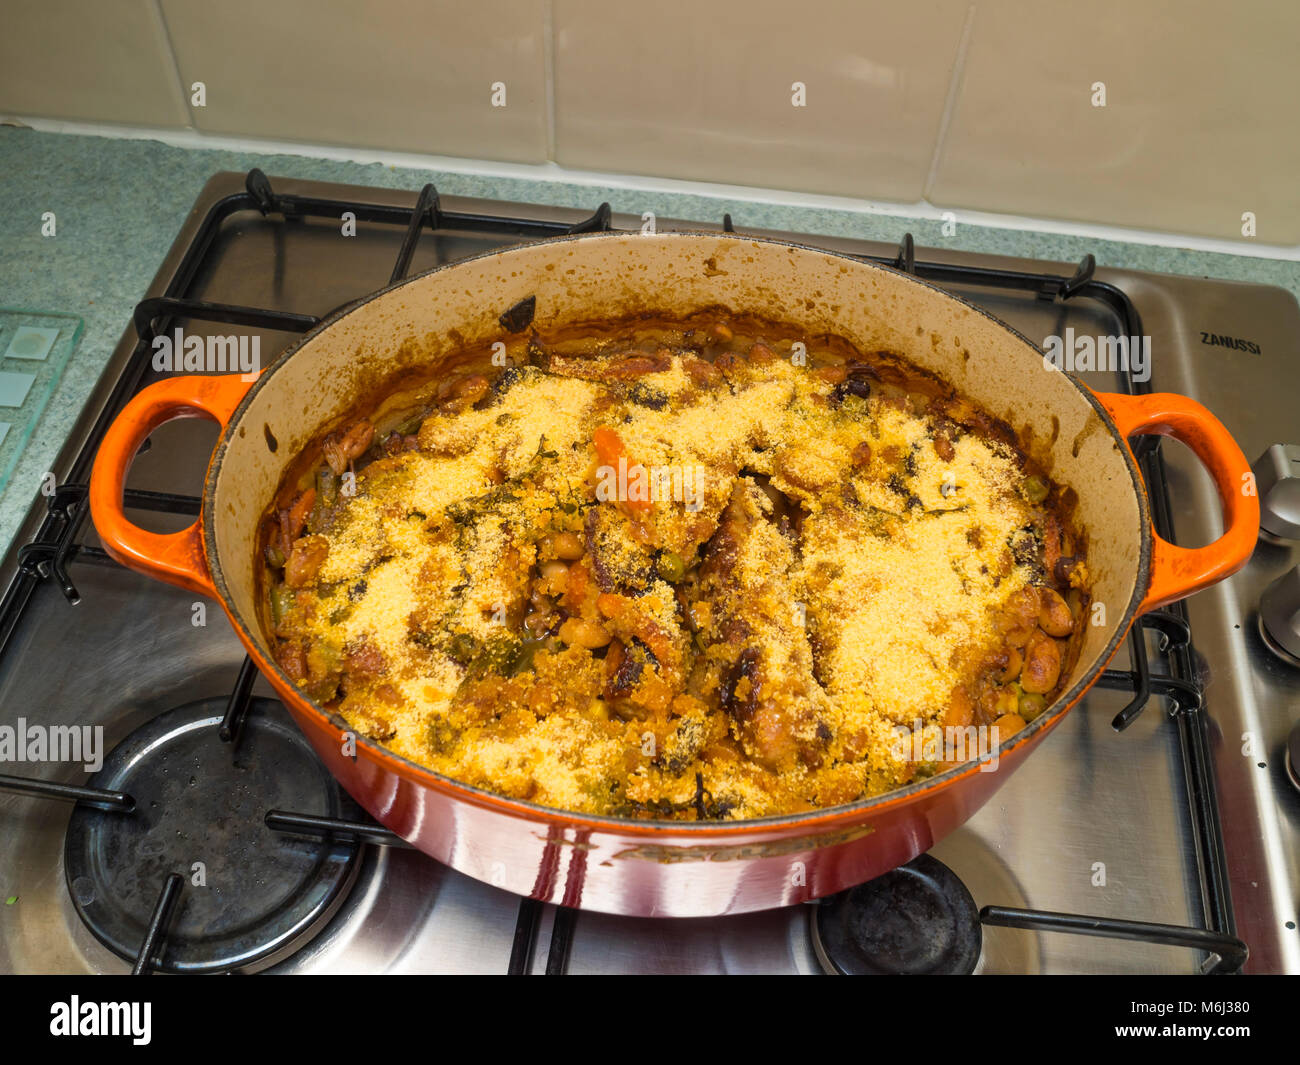 Casserole with a freshly cooked Cassoulet made from sausages bacon lardons and vegetables sprinkled with bread crumbs Stock Photo